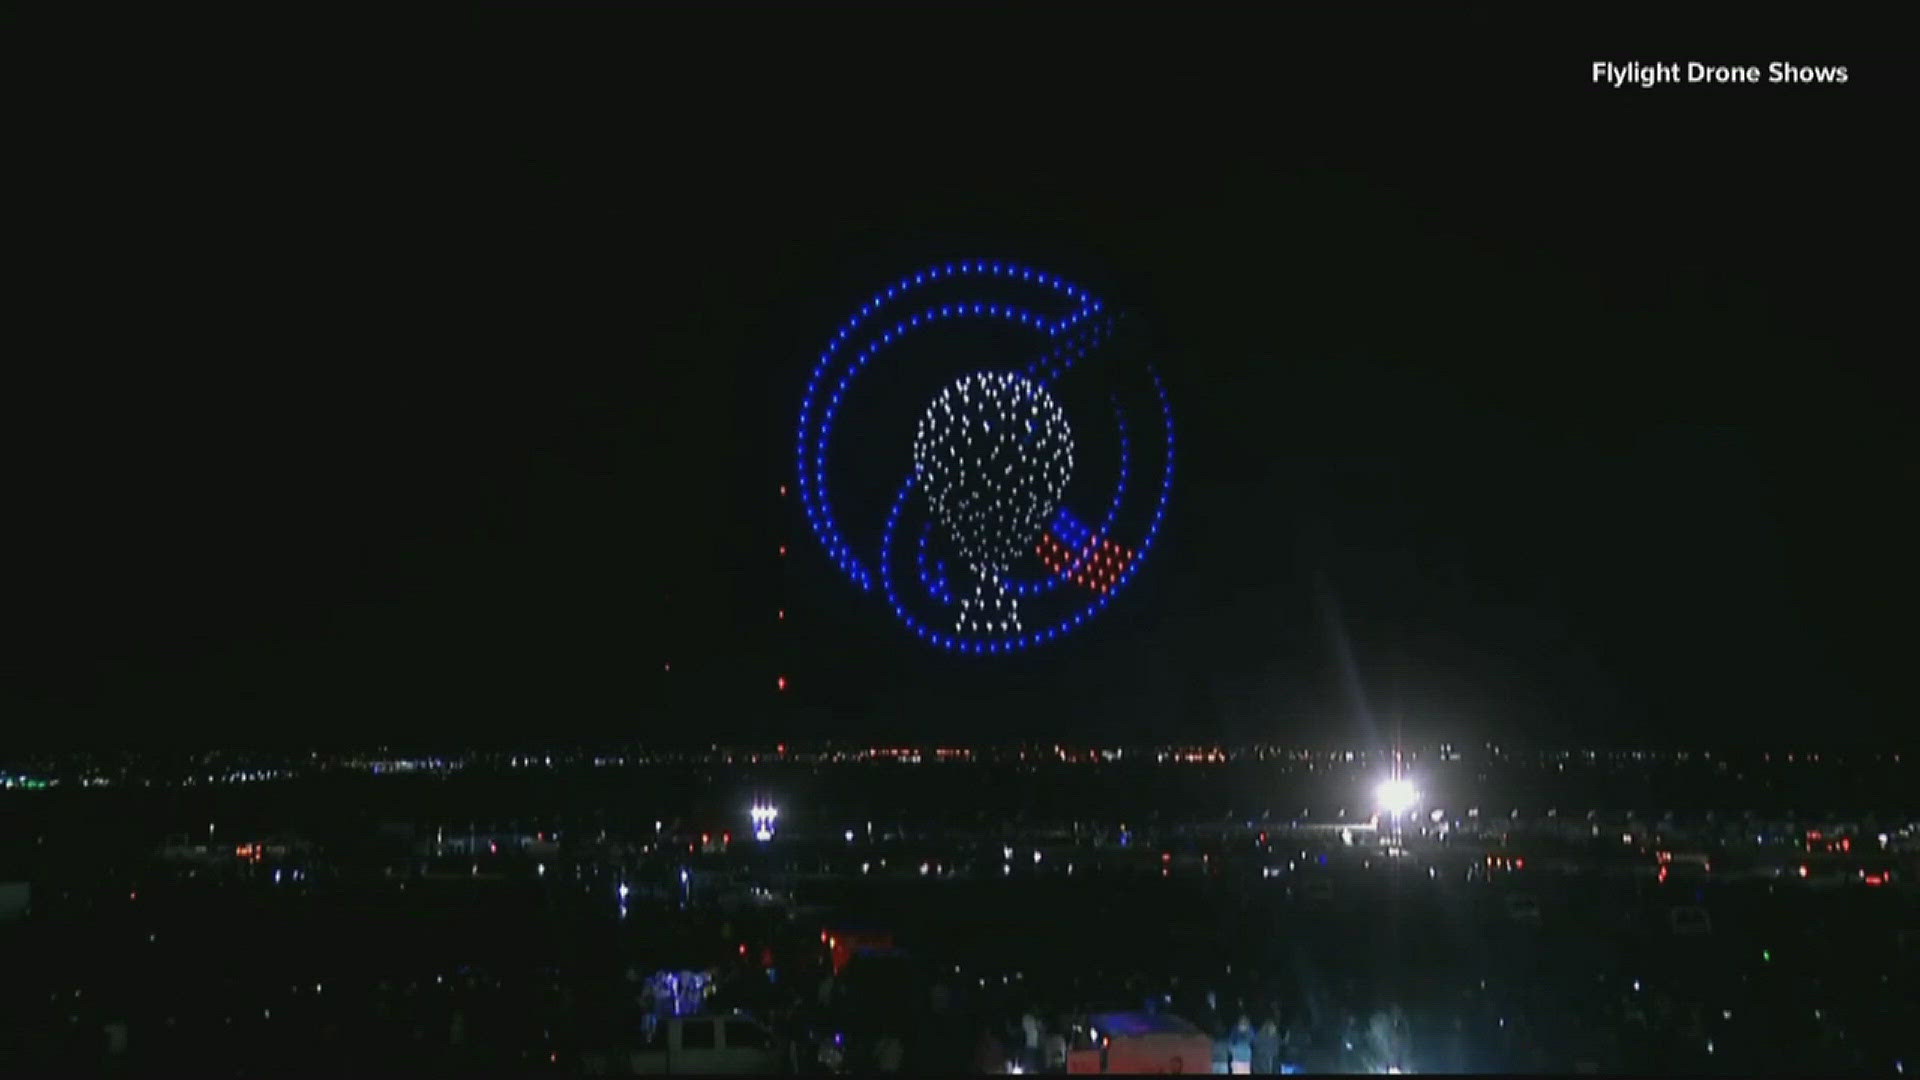 The red, white and you event features live music, food and a drone show instead of fireworks.